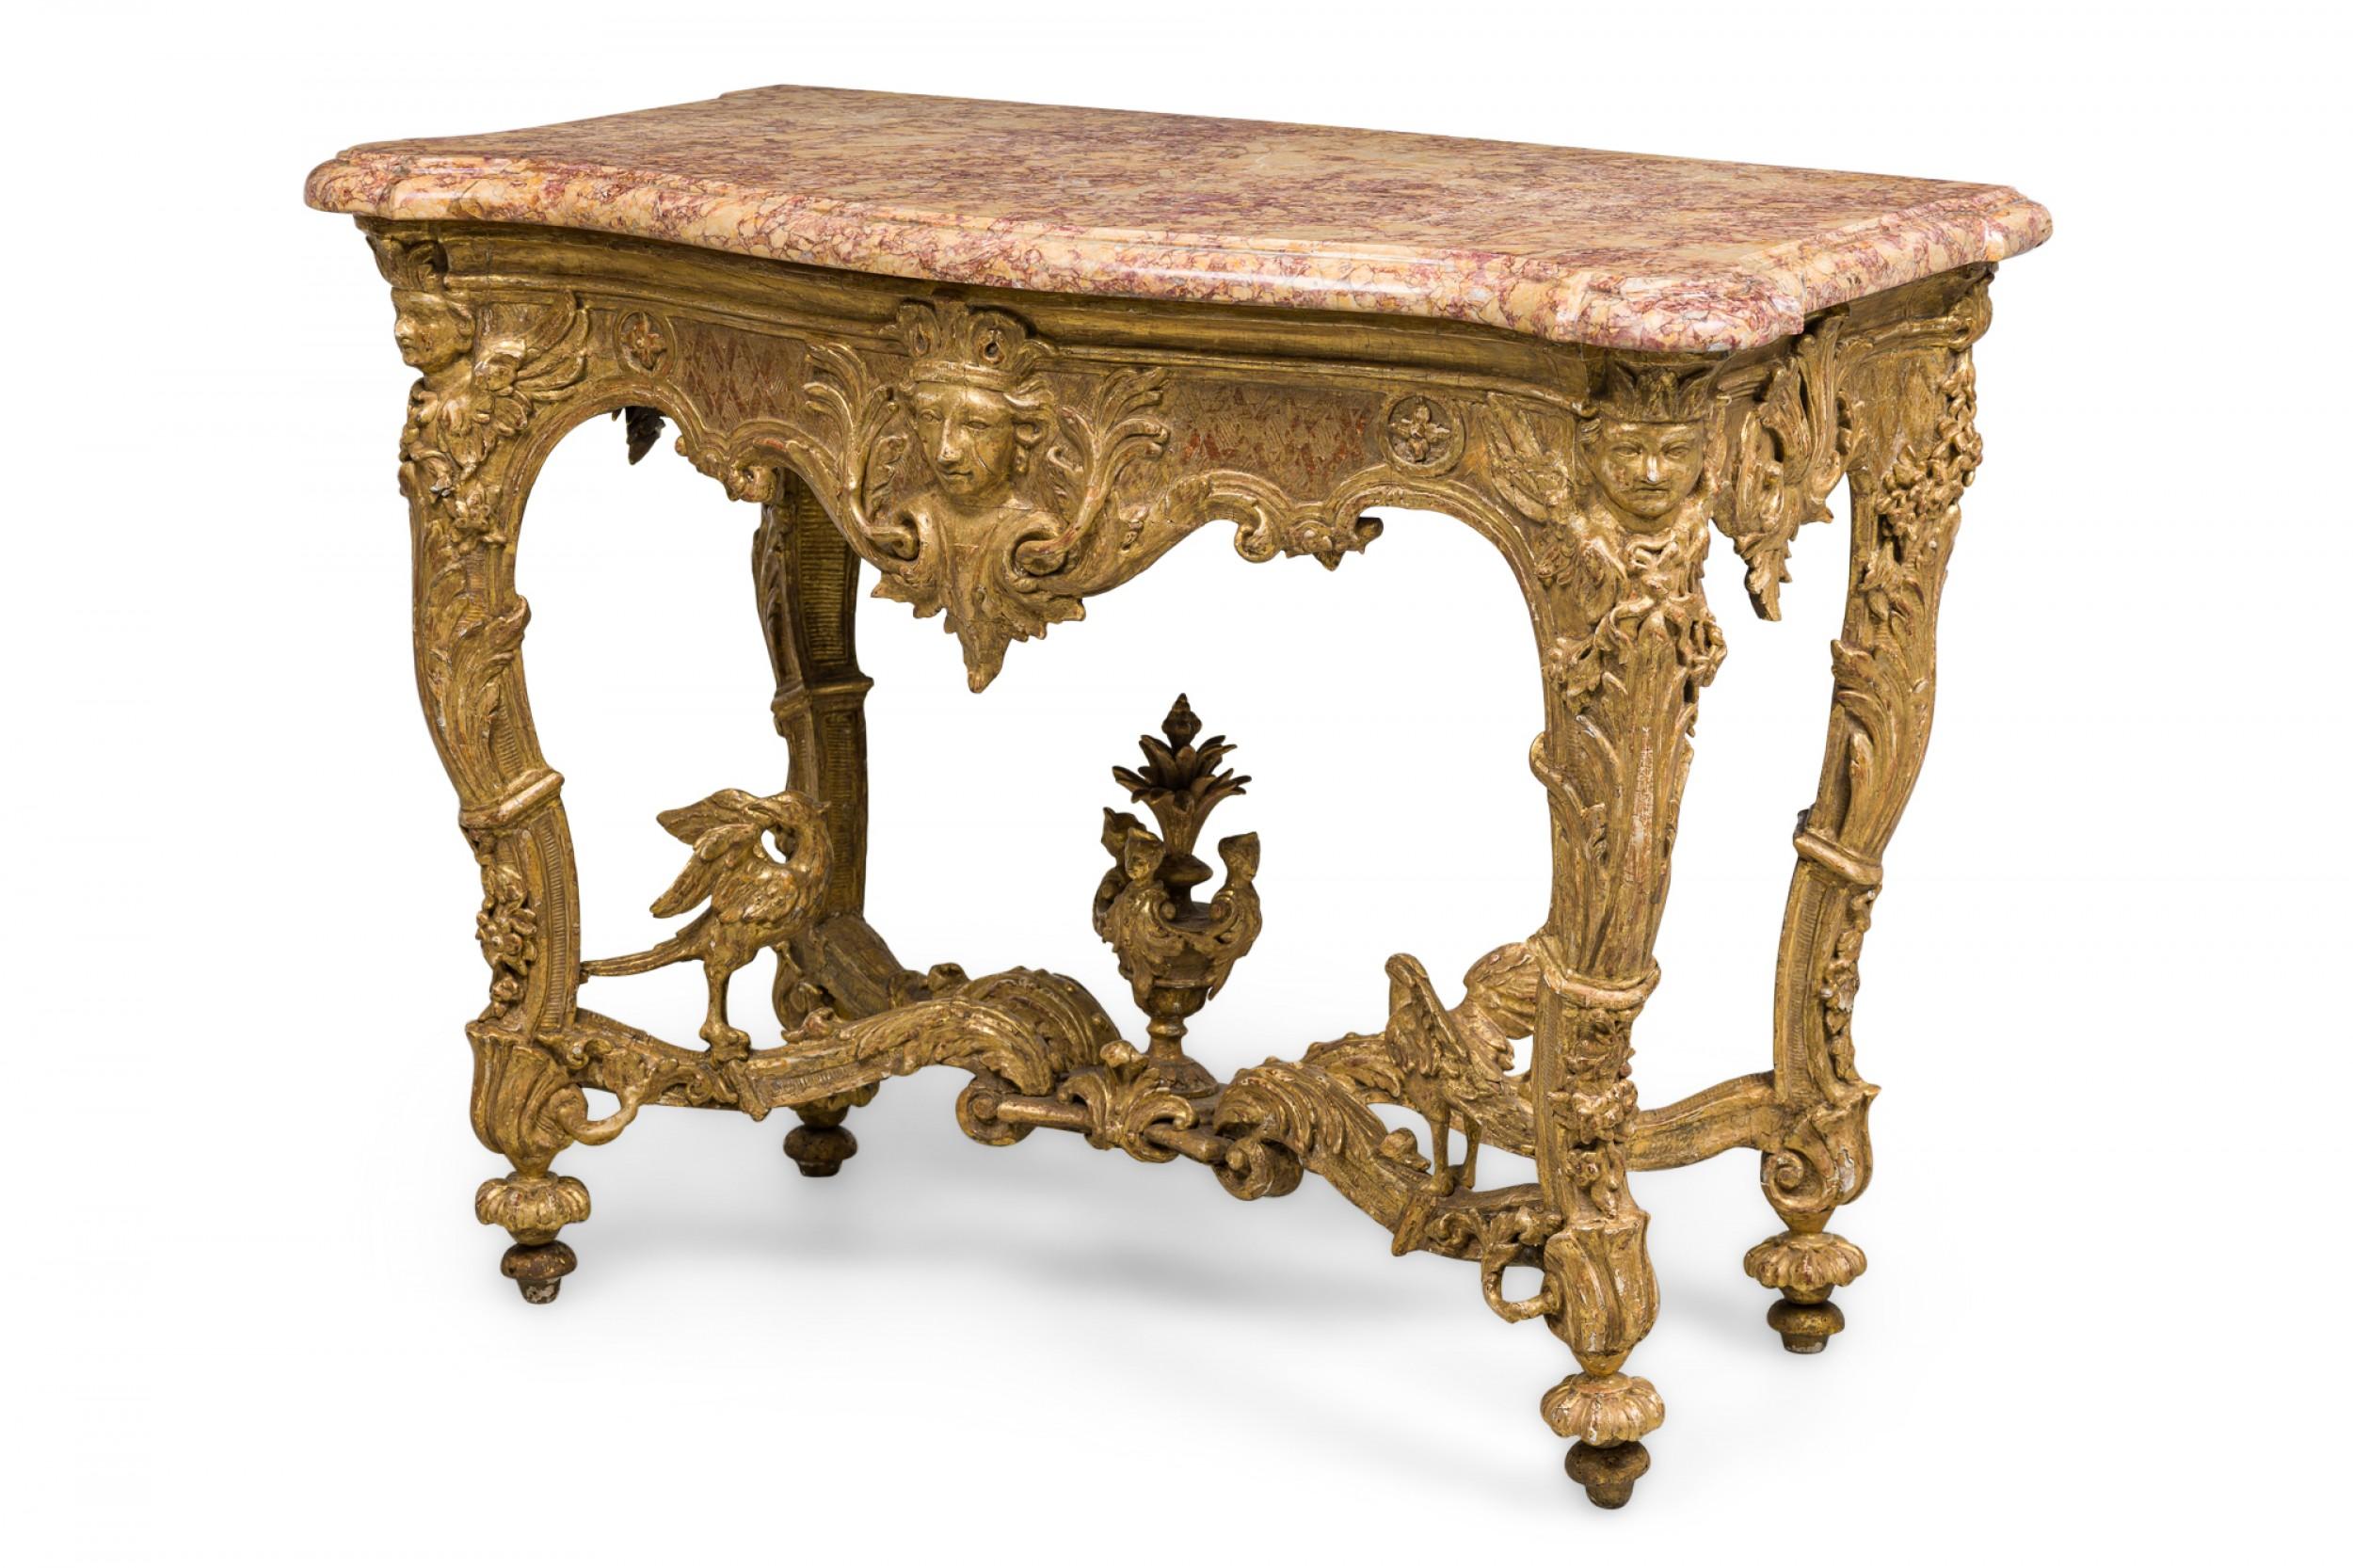 French Louis XV console table with an ornately carved giltwood base with figural designs and topped with a shaped beige, yellow, and blush marble top.